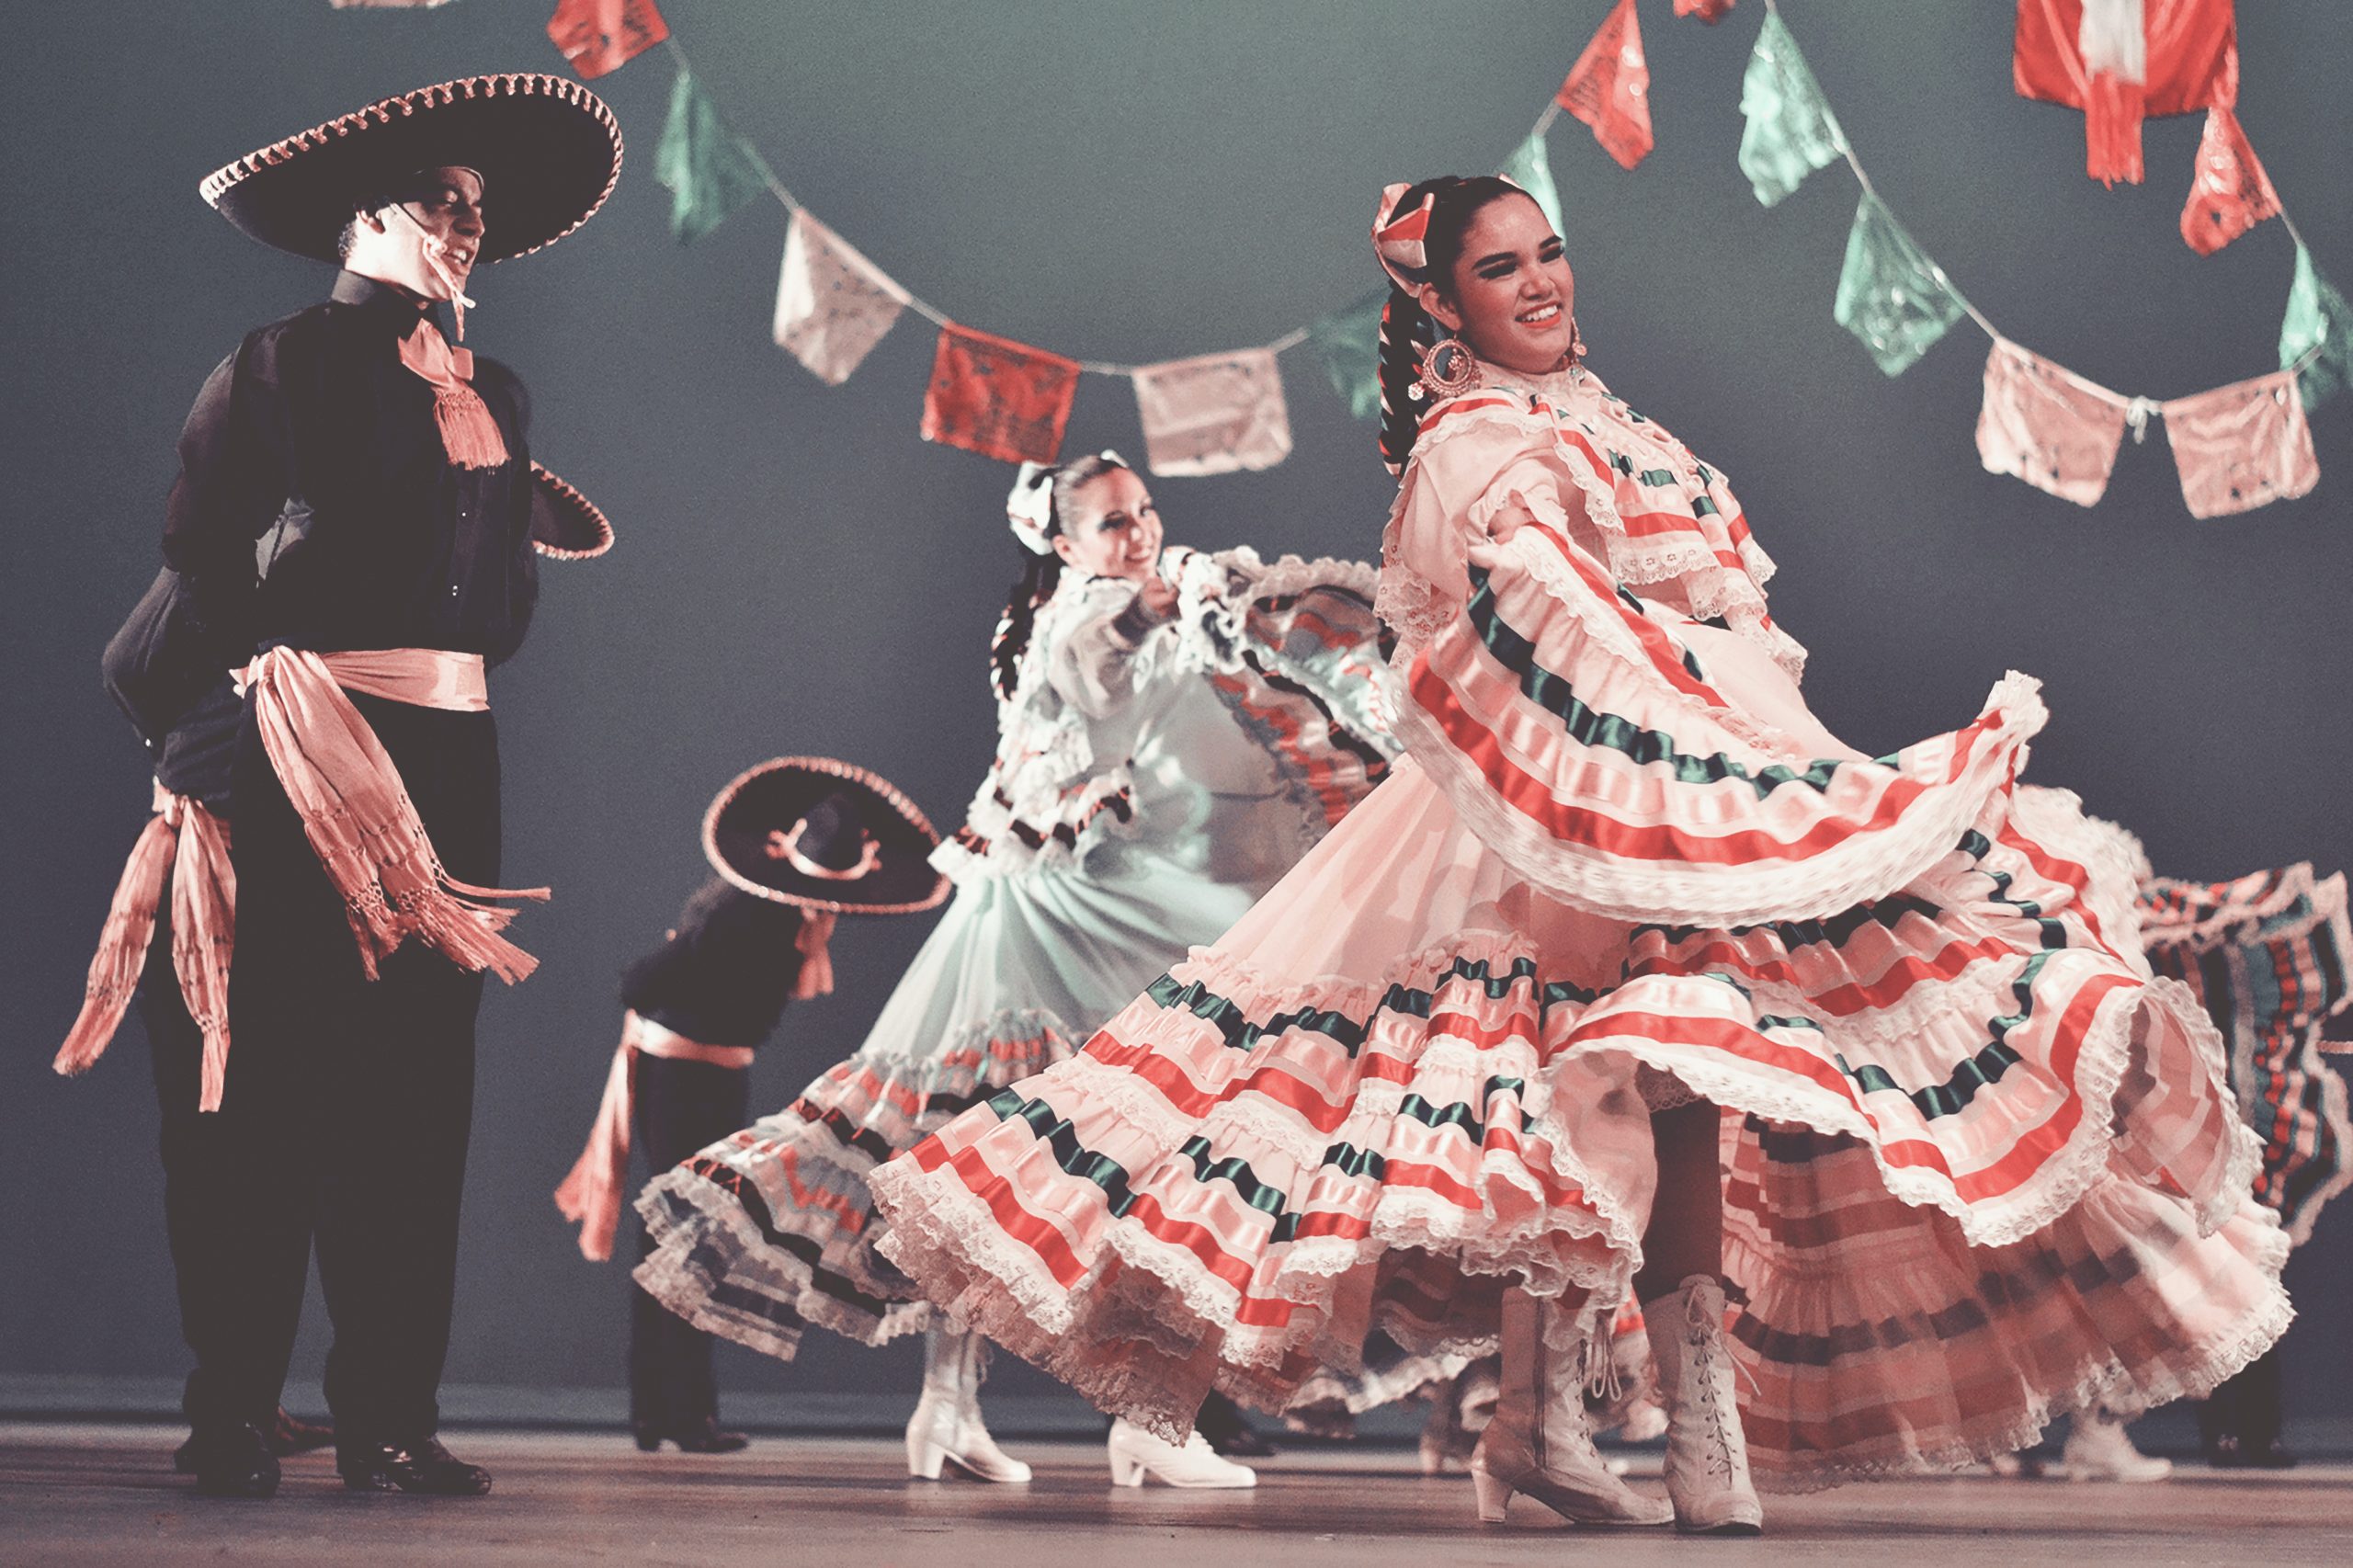 12 traditional dances from around the world